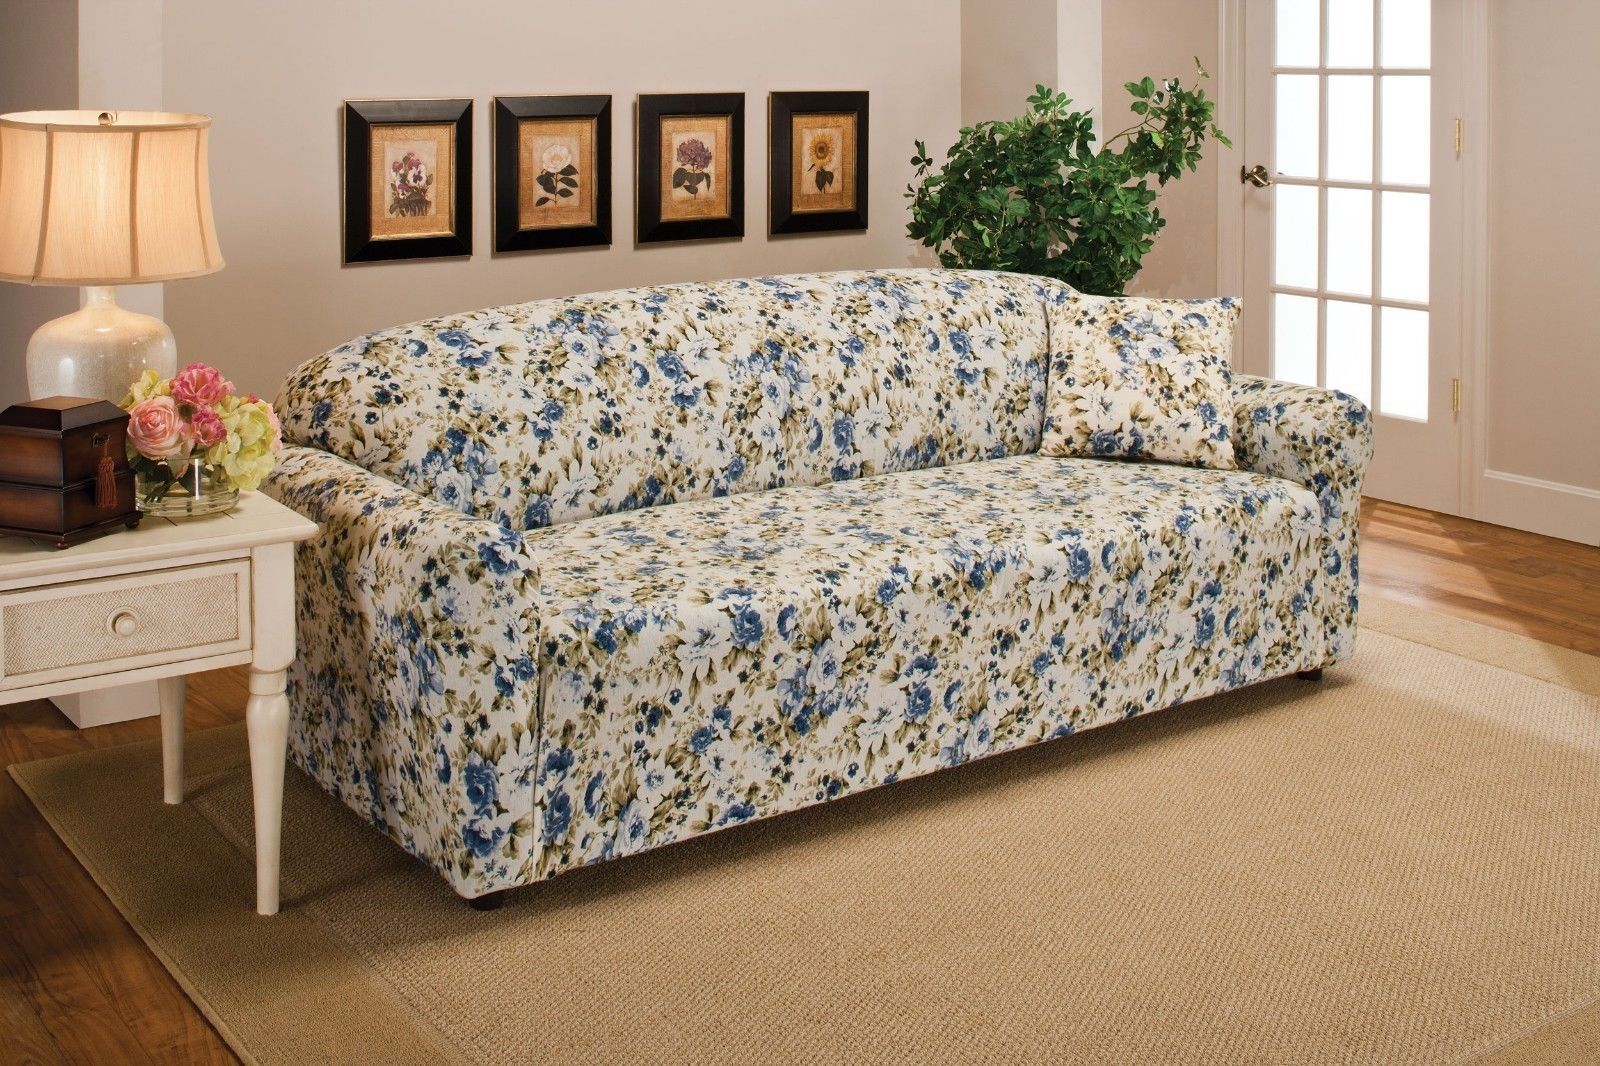 Flower Print Sofa 1970 Floral Sofa Flower Print Couch Suzy Q With Chintz Sofas And Chairs (View 3 of 15)